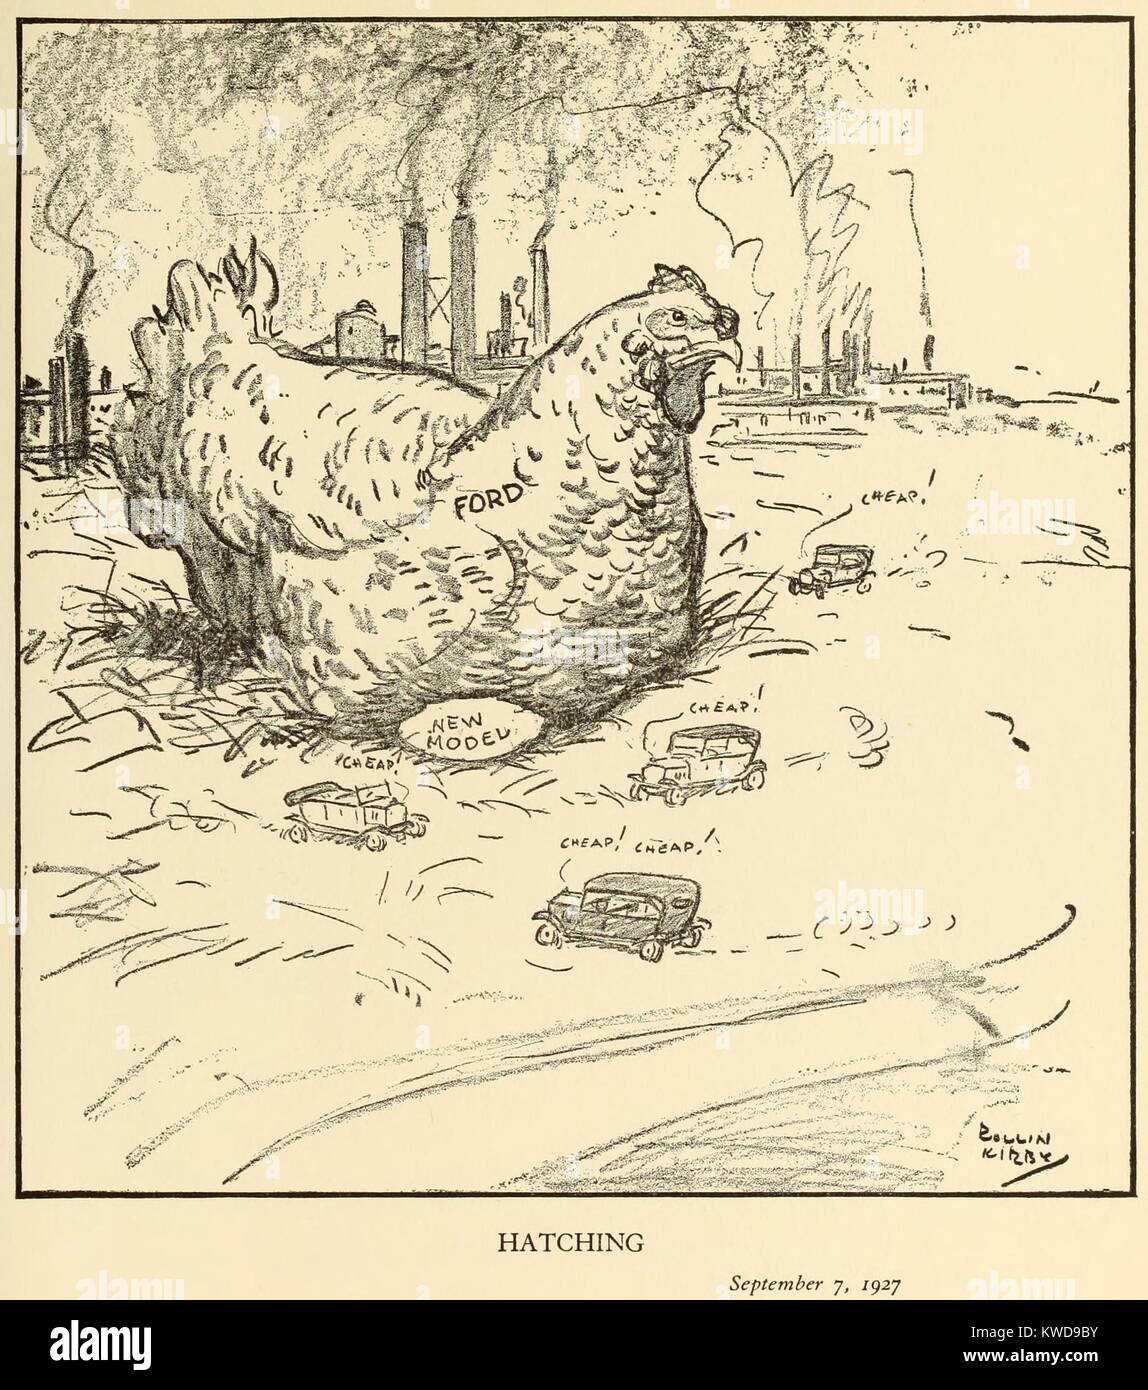 HATCHING, Cartoon by Rollin Kirby, for the New York World, Sept 7, 1927. The country was anticipating Ford's introduction of the Model A, which would replace the Model T after 18 on the market, since 1909. The mother hen is labeled 'Ford' and sits on an egg, 'New Model', as little cars make 'cheap' sounds (BSLOC 2016 10 130) Stock Photo